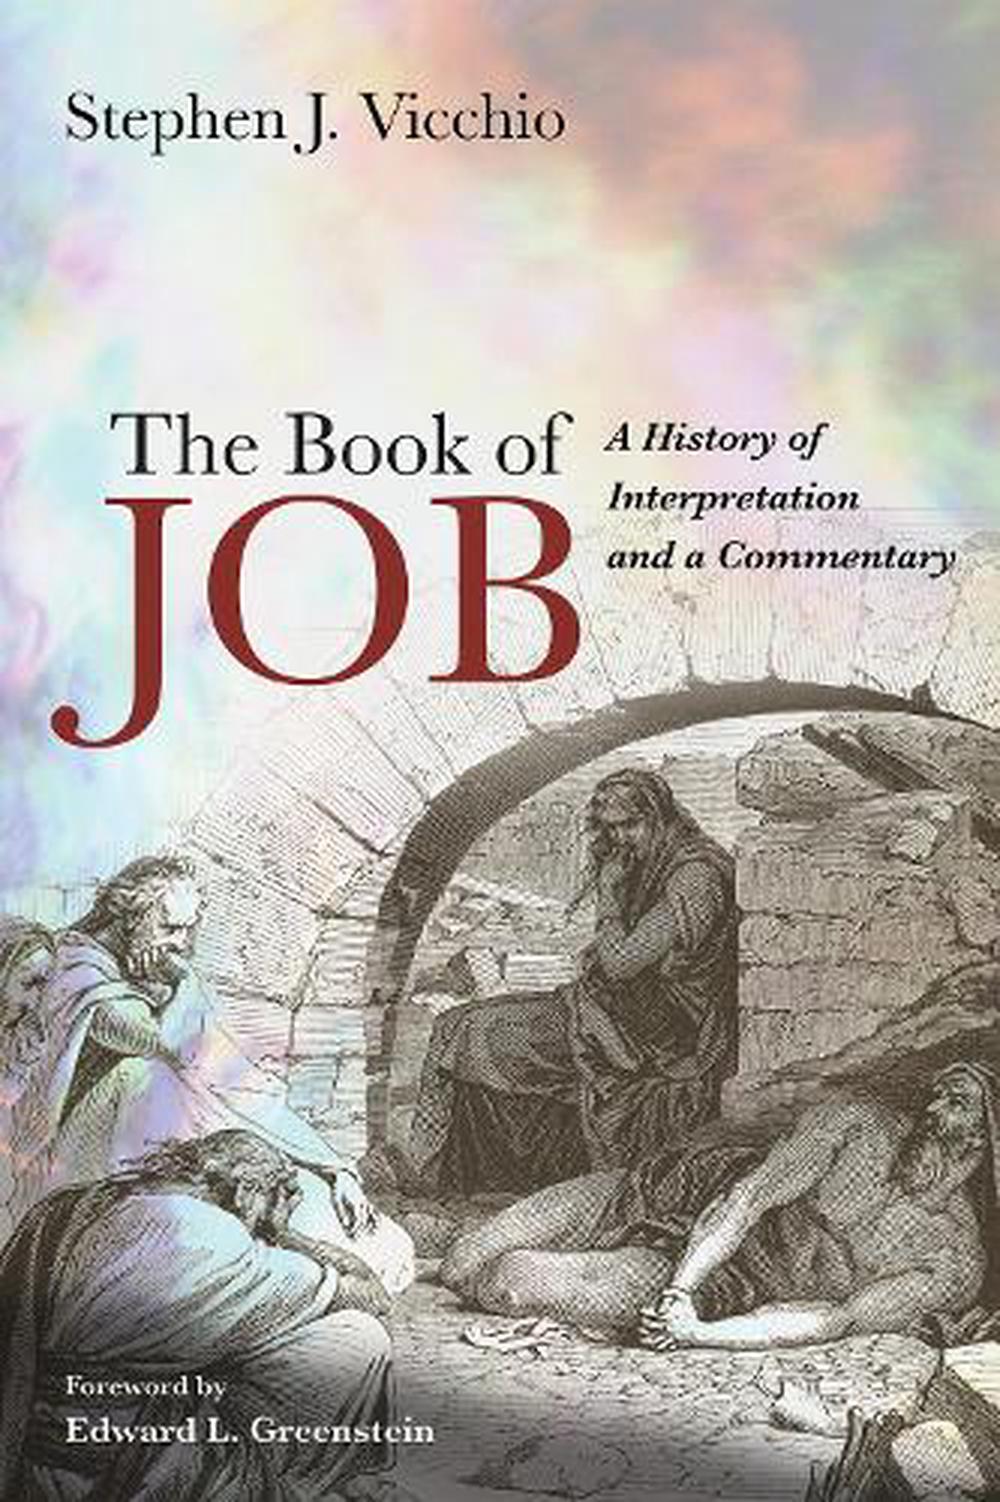 who wrote the book of jobs